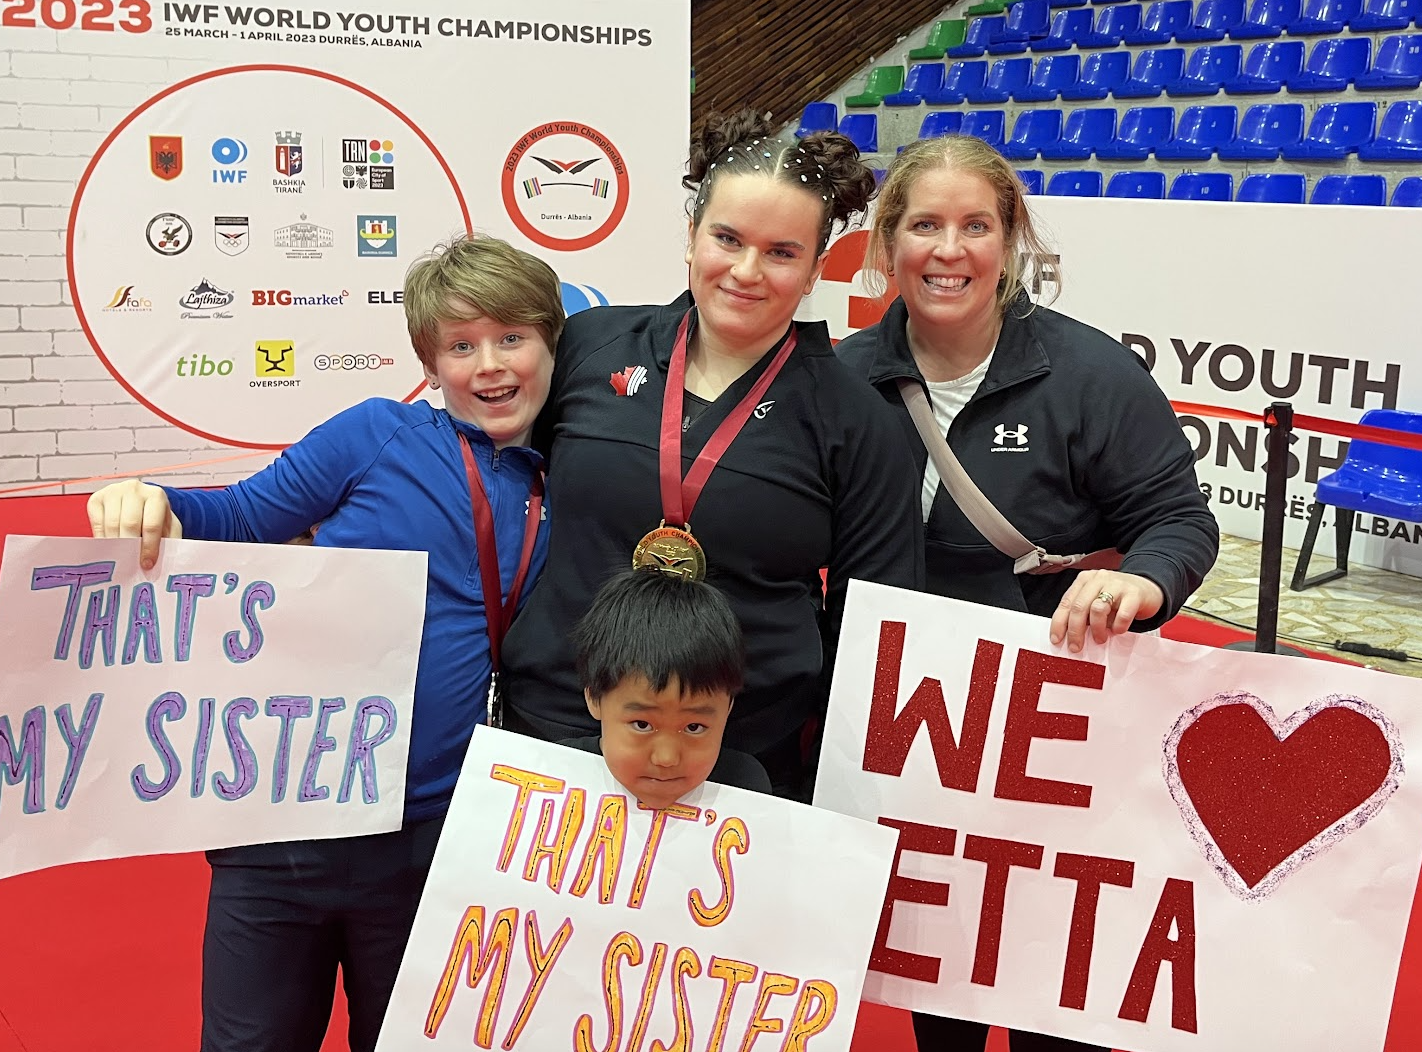 IWF’s Jalood hails Canada and "new culture" weightlifting teams at World Youth Championships